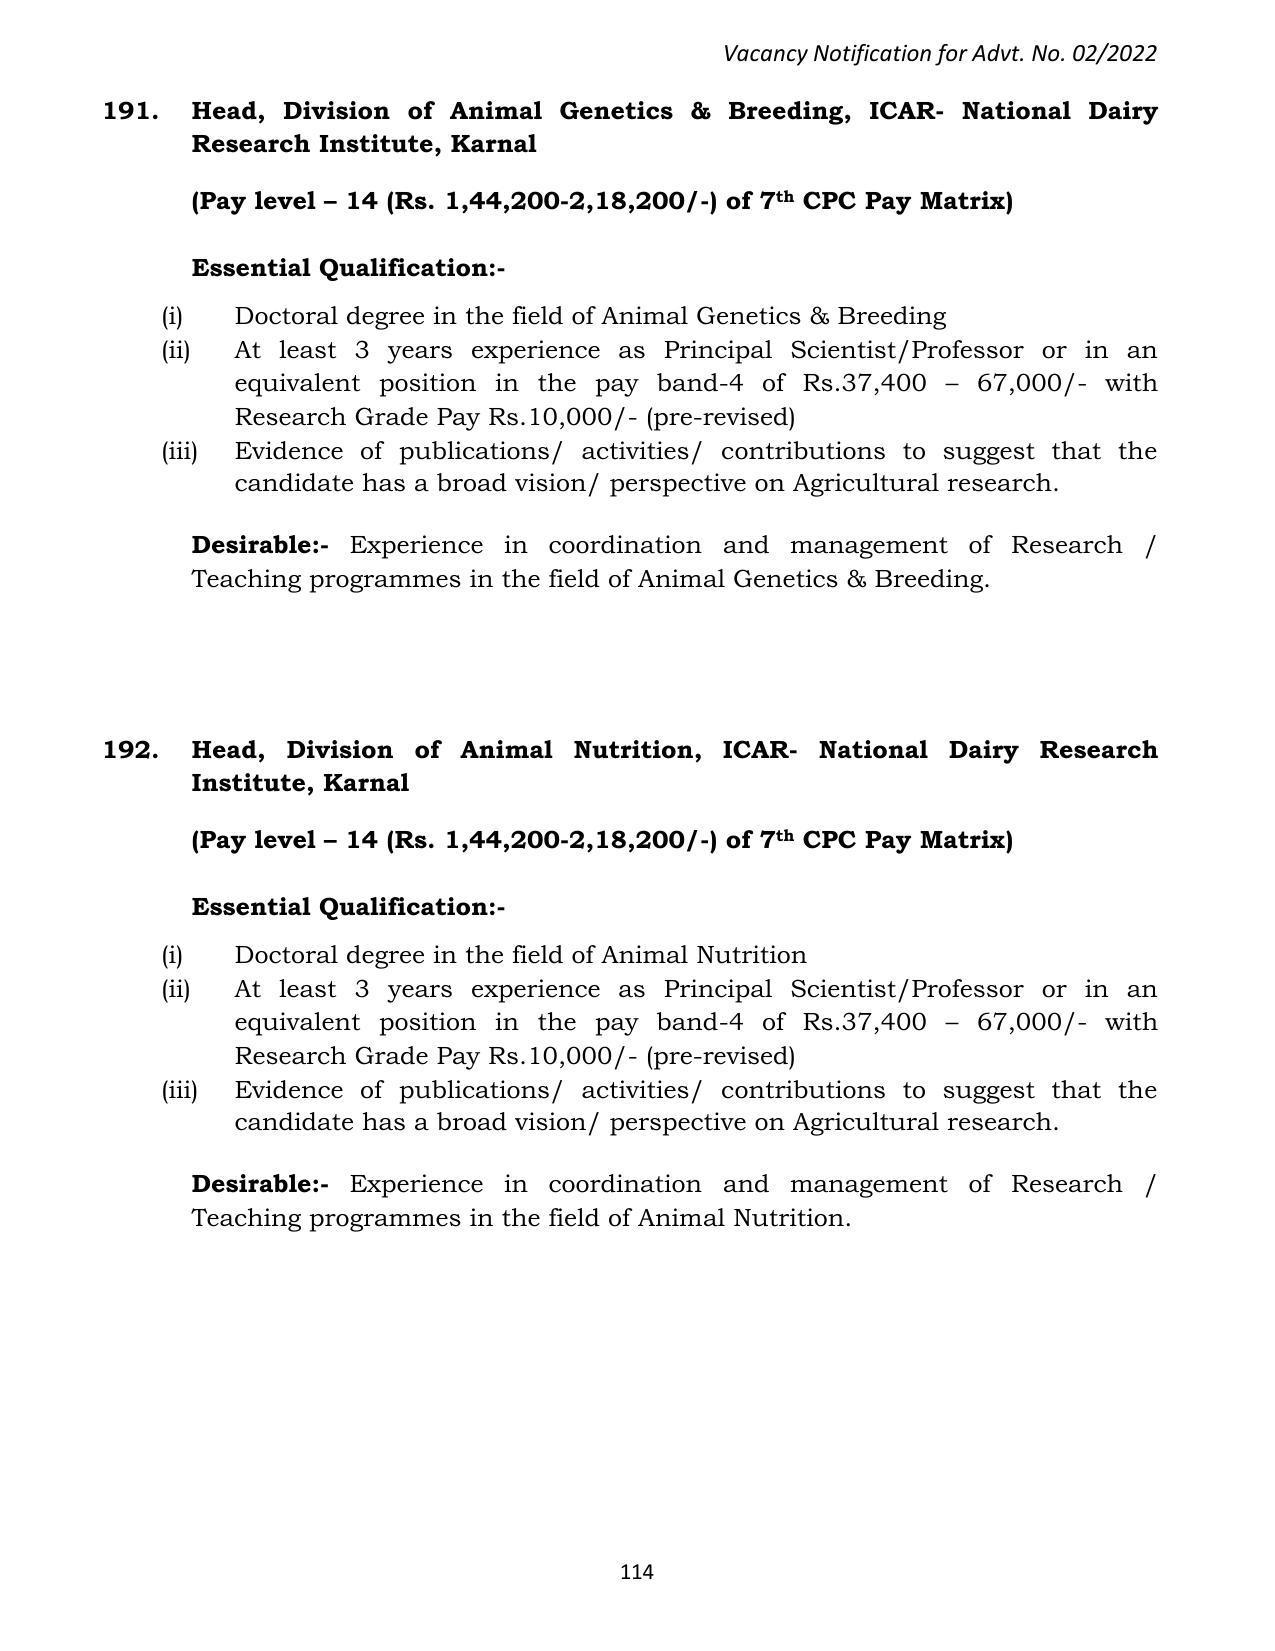 ASRB Non-Research Management Recruitment 2022 - Page 127